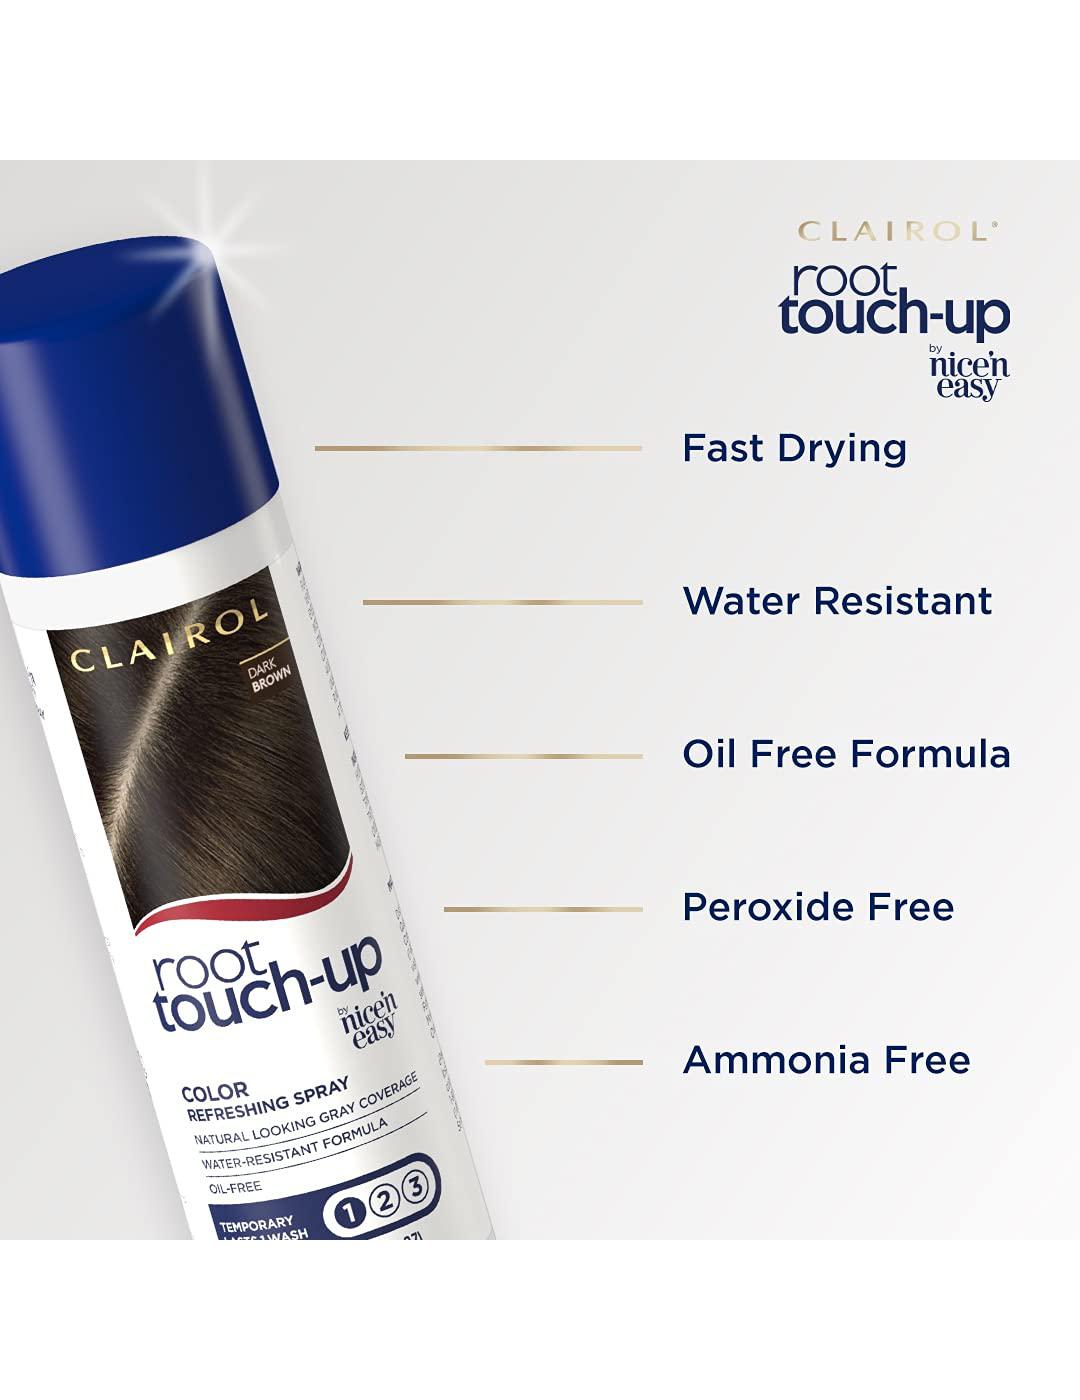 Clairol Root Touch-Up Color Refreshing Spray Black; image 2 of 3